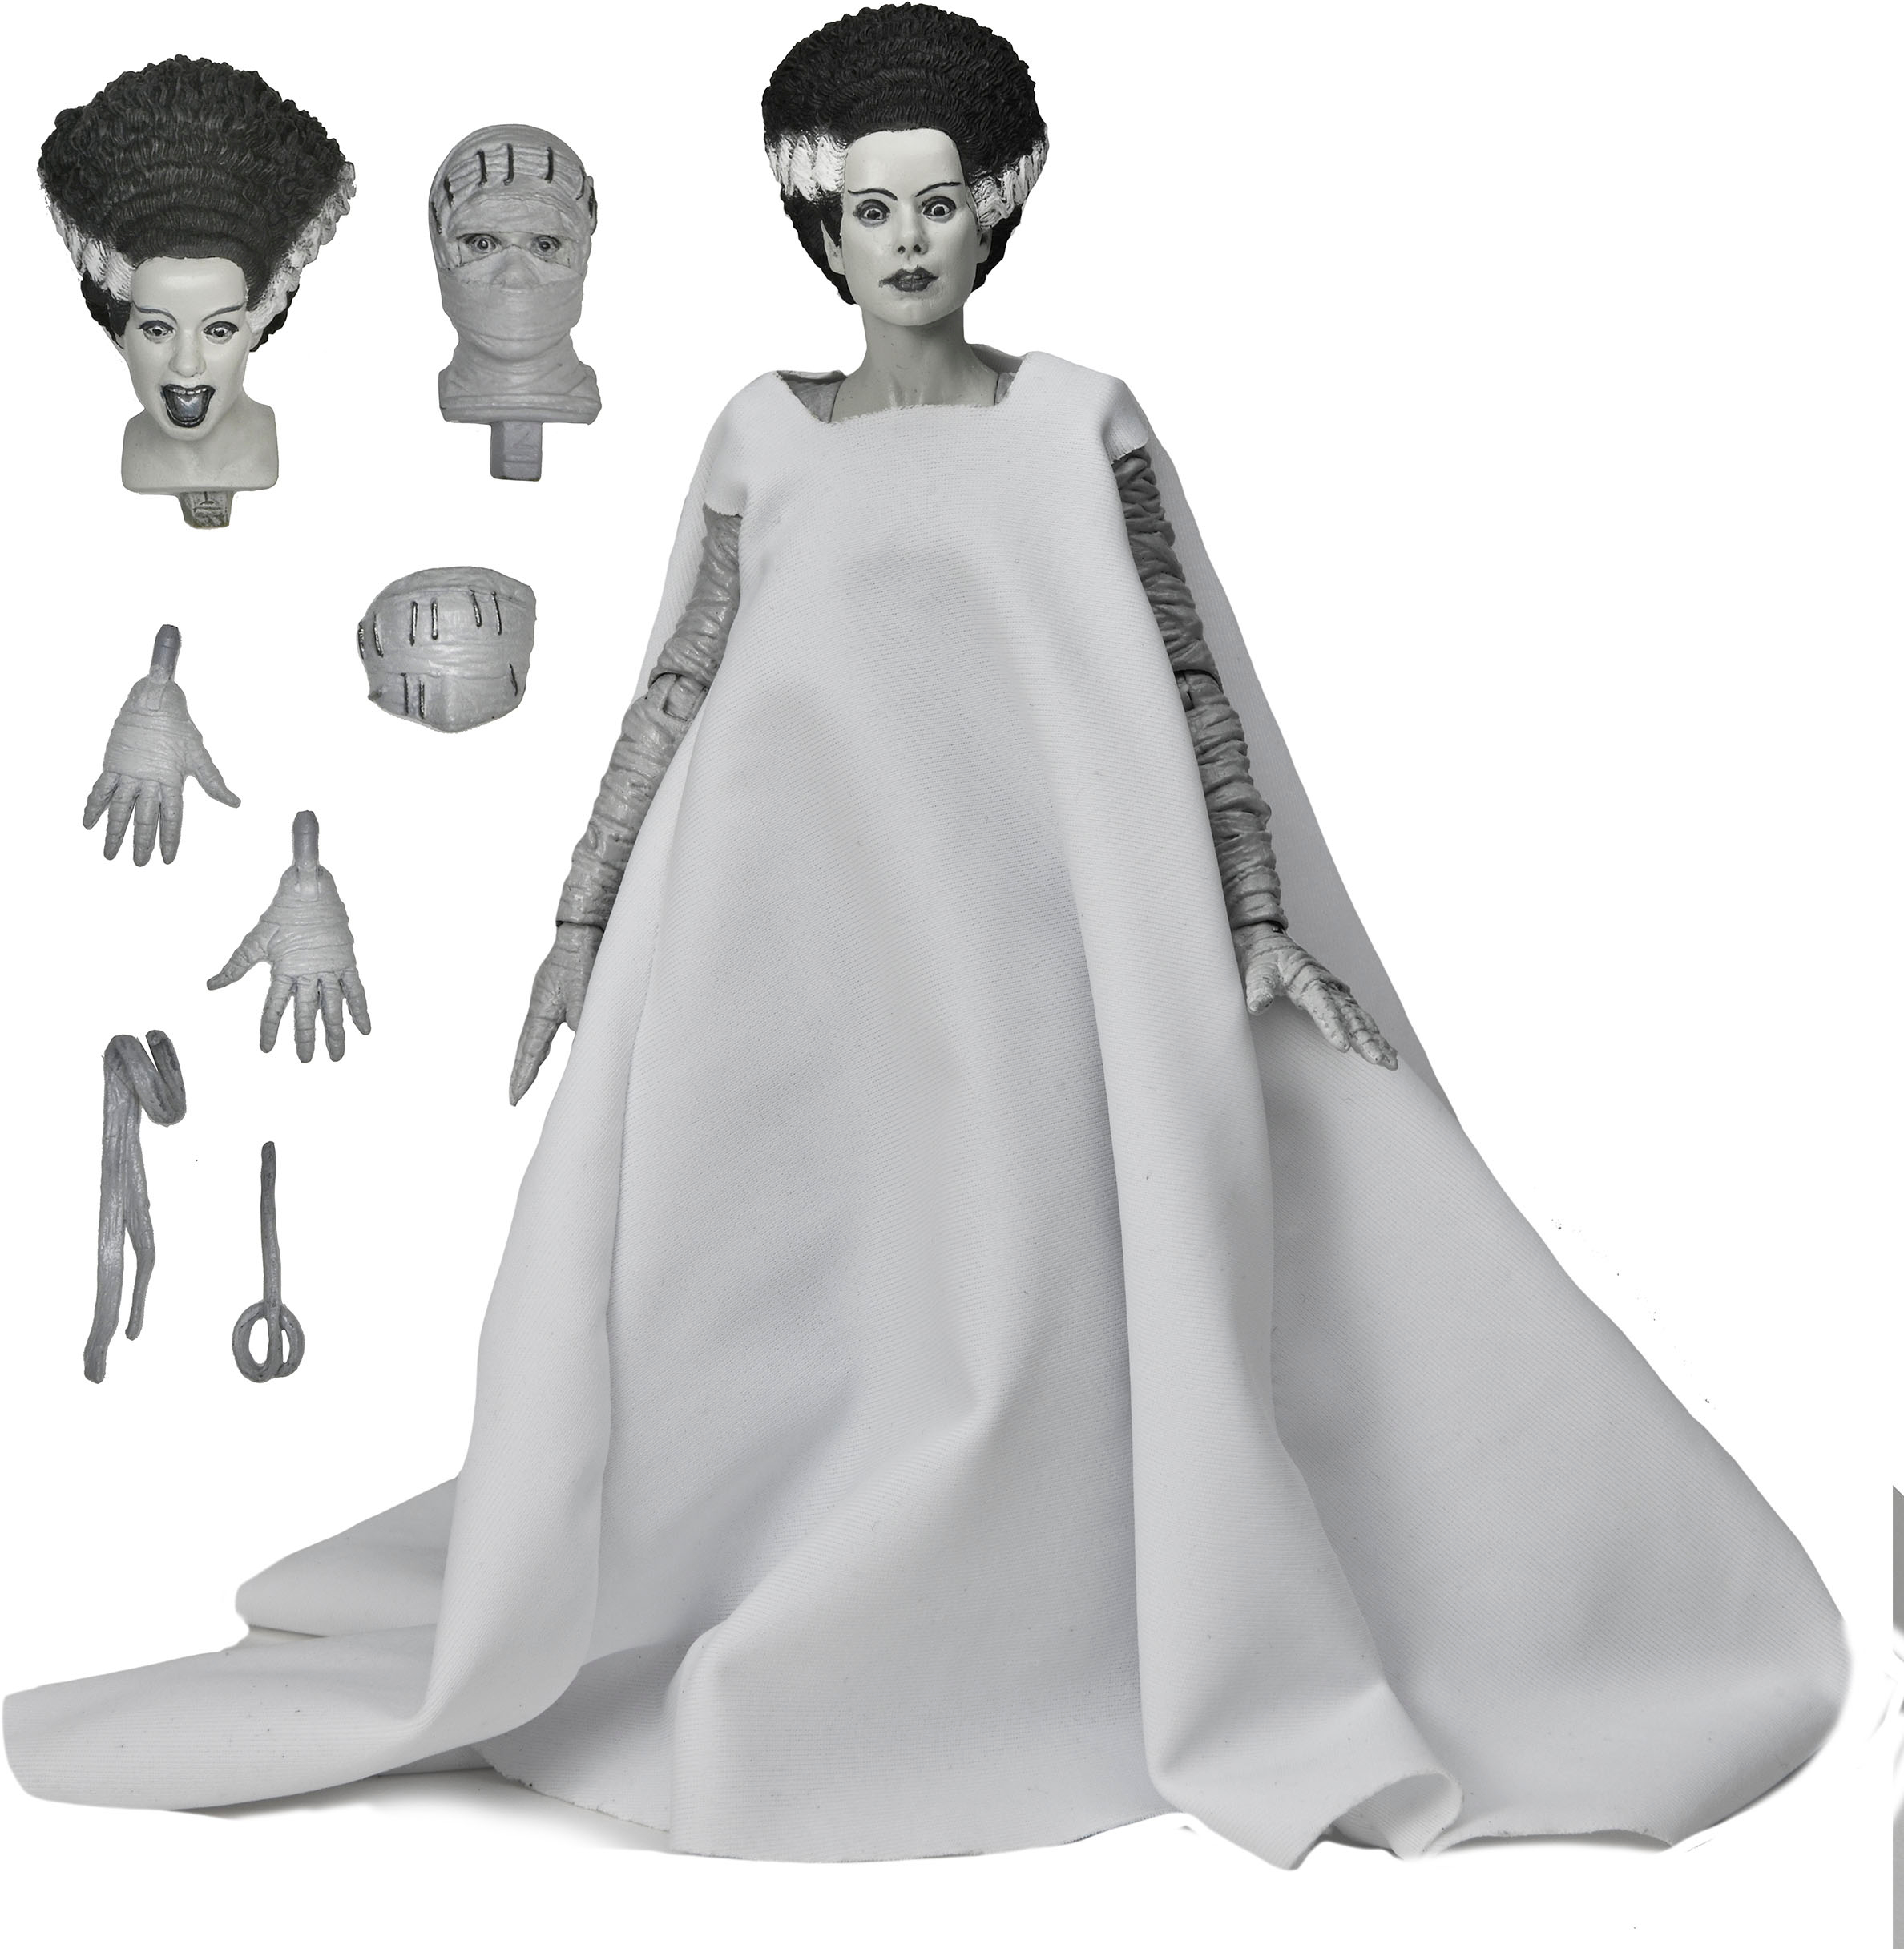 NECA - Universal Monsters 7” Ultimate Action Figure-The Bride of Frankenstein - Black and White